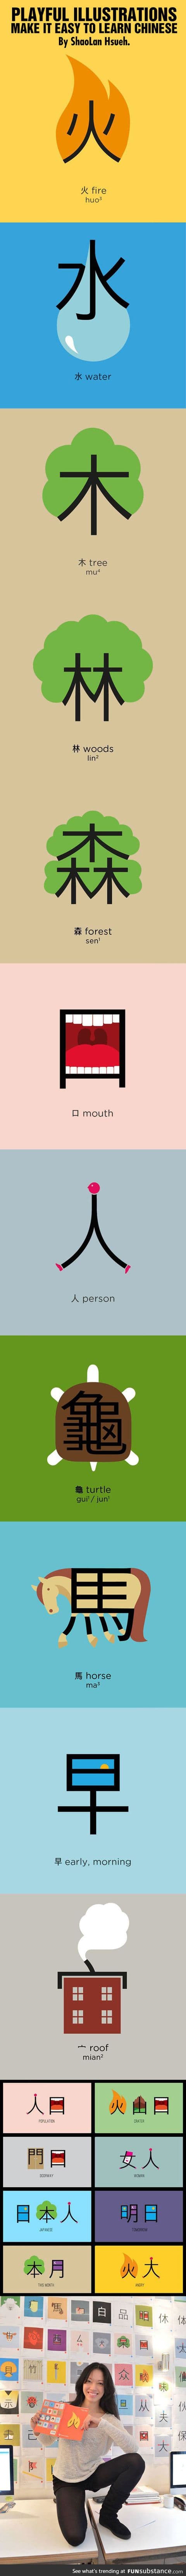 These illustrations make it easy to learn chinese